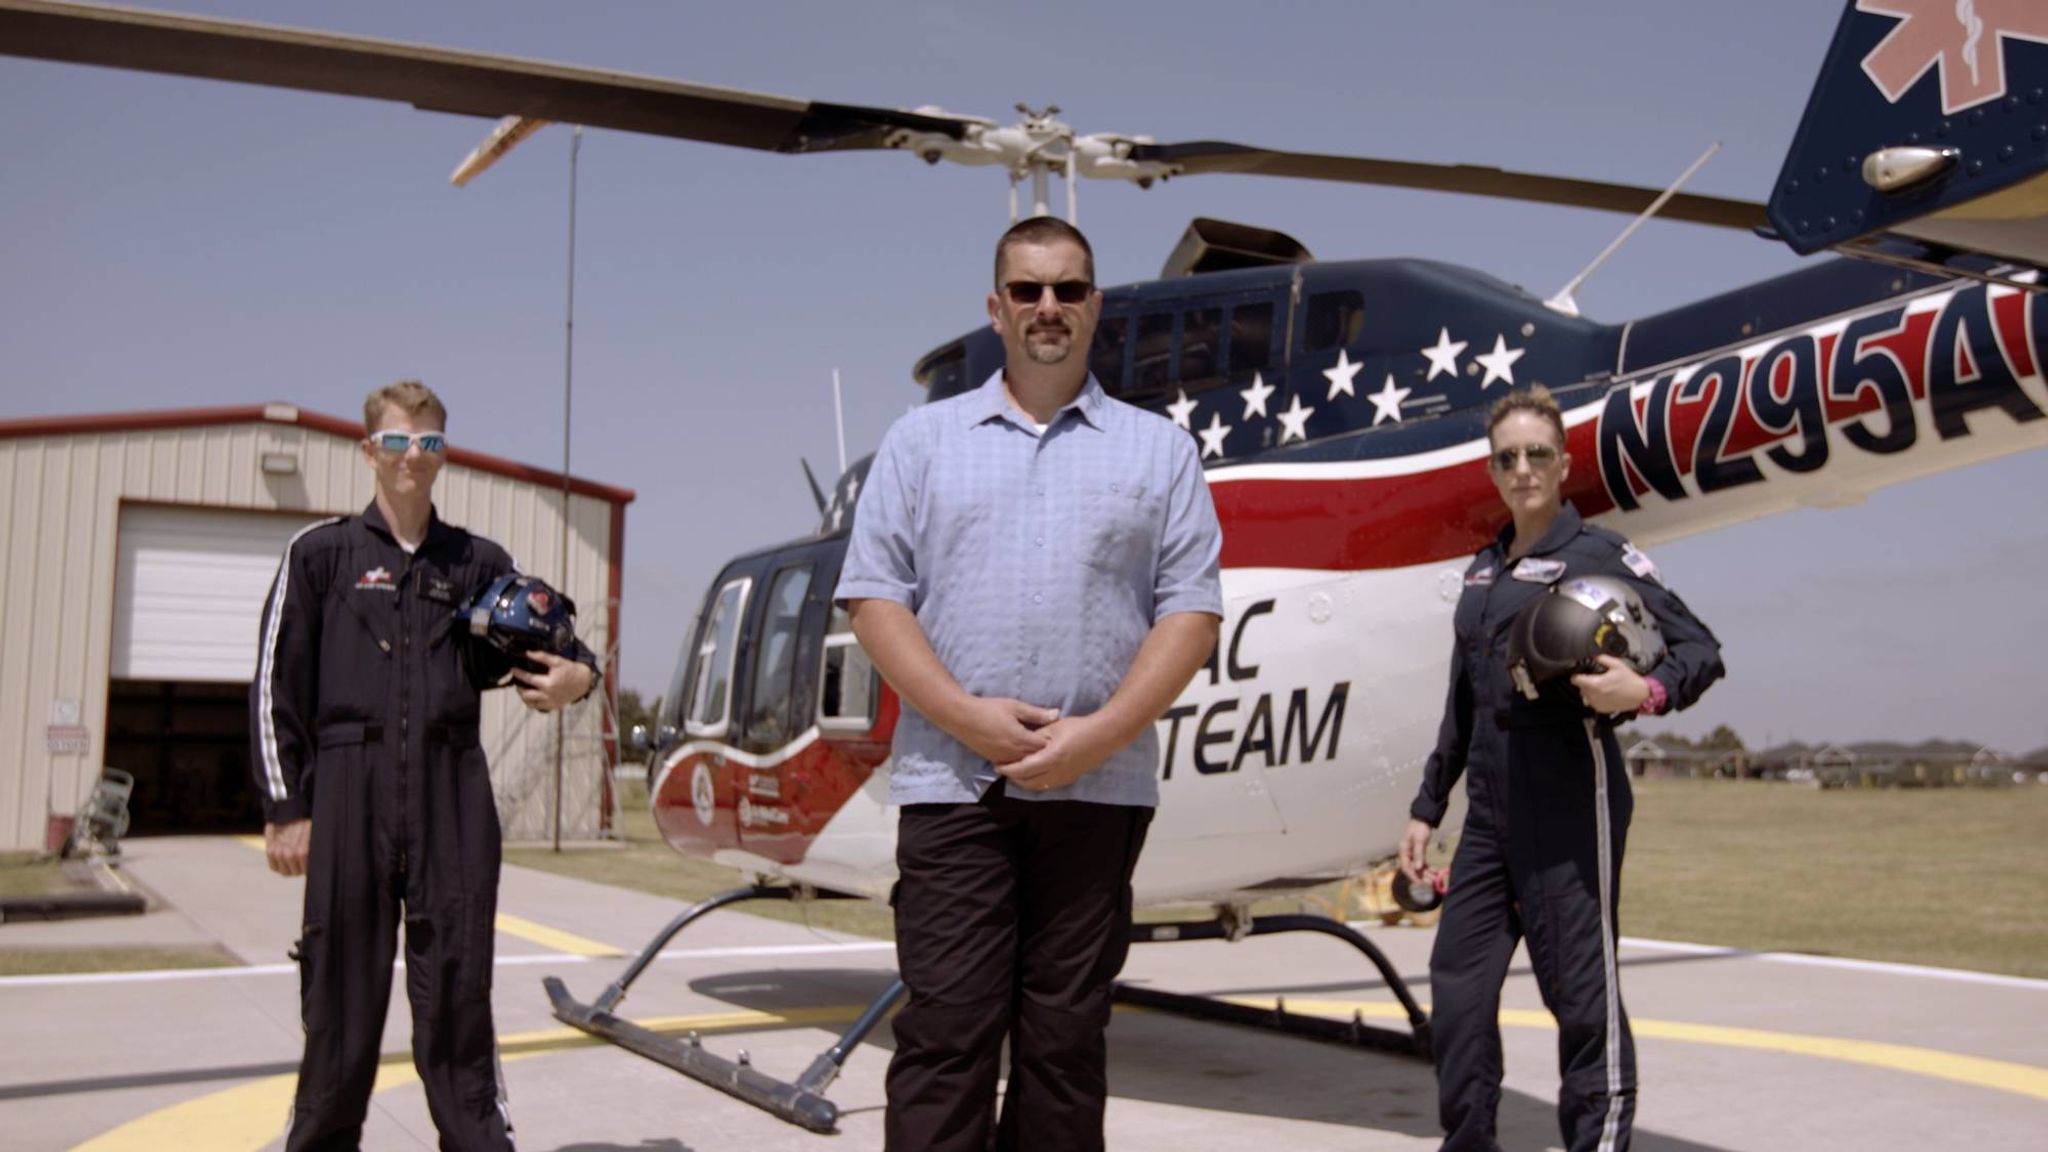 Three men standing on a helicopter tarmac with a helicopter behind them. The man in the center is wearing a blue shirt and sunglasses. The men to either side are in uniform.